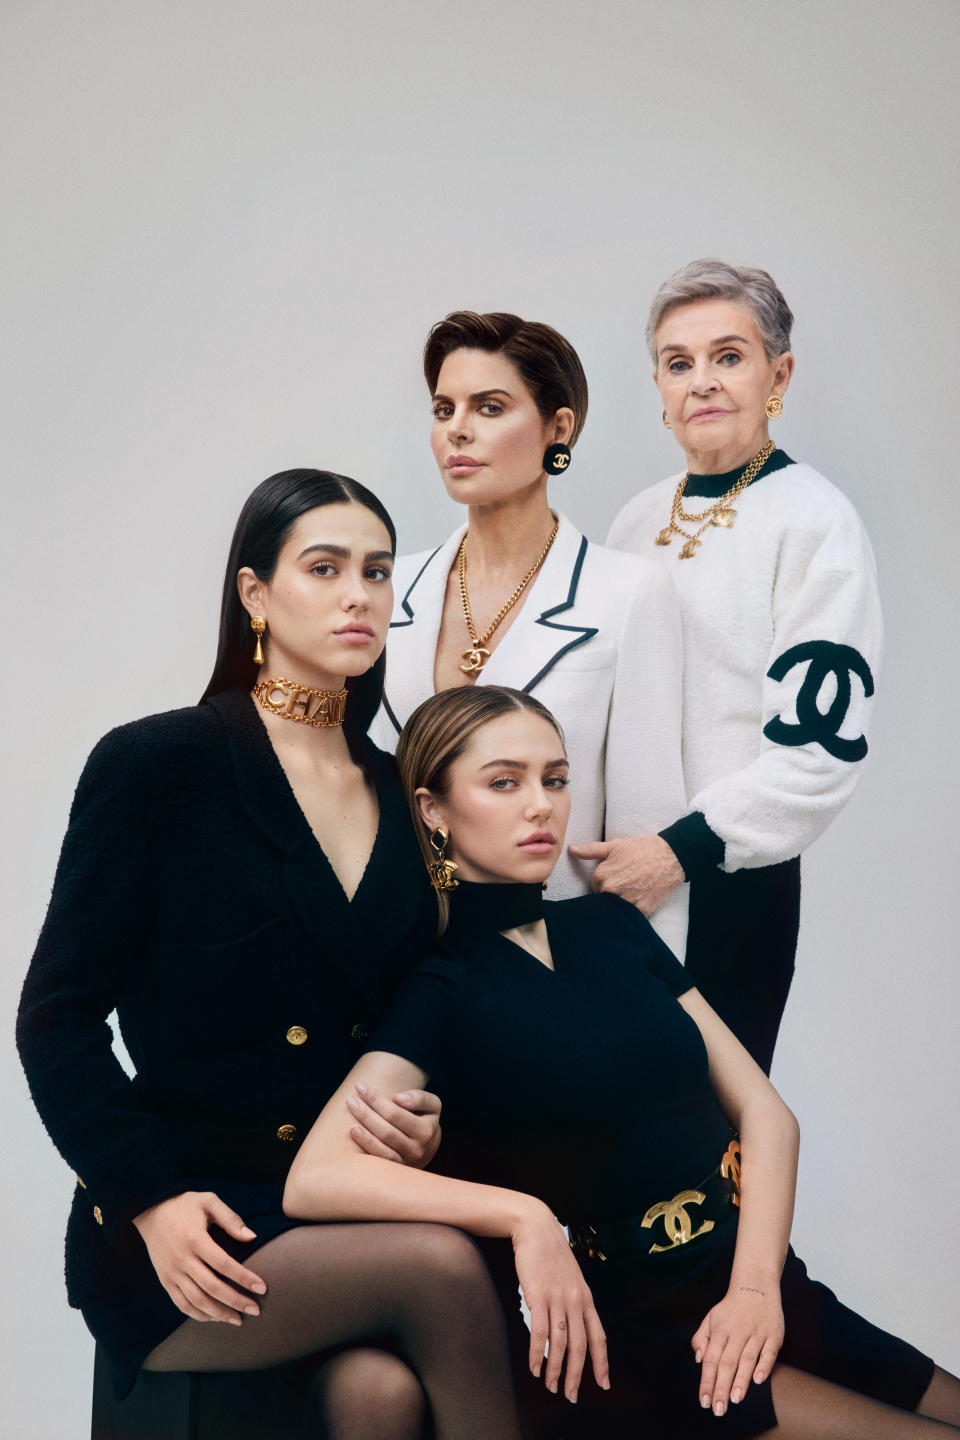 Rinna posed with daughters, Delilah Belle Hamlin, 20, and Amelia Gray Hamlin, 17, as well as her 90-year-old mother, Lois. (Credit: Olivia Malone)